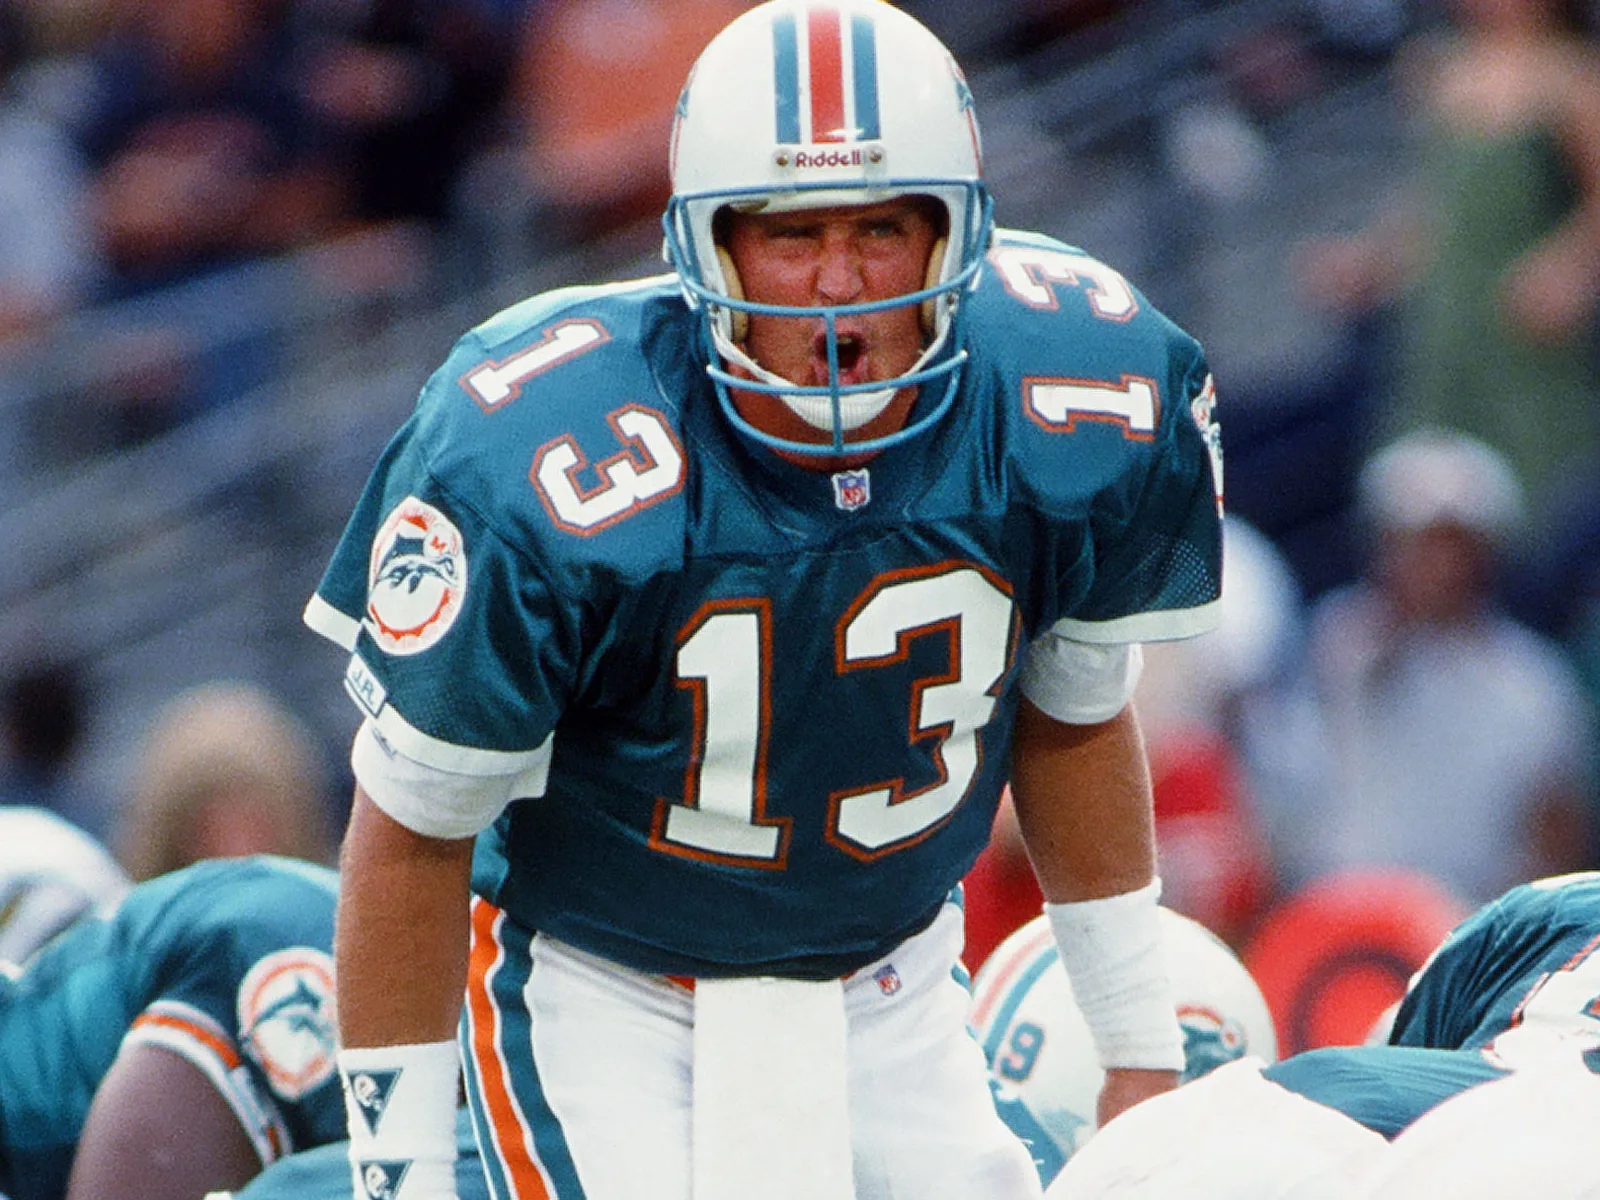 Outside of Dan Marino who is the best Dolphins player ever?